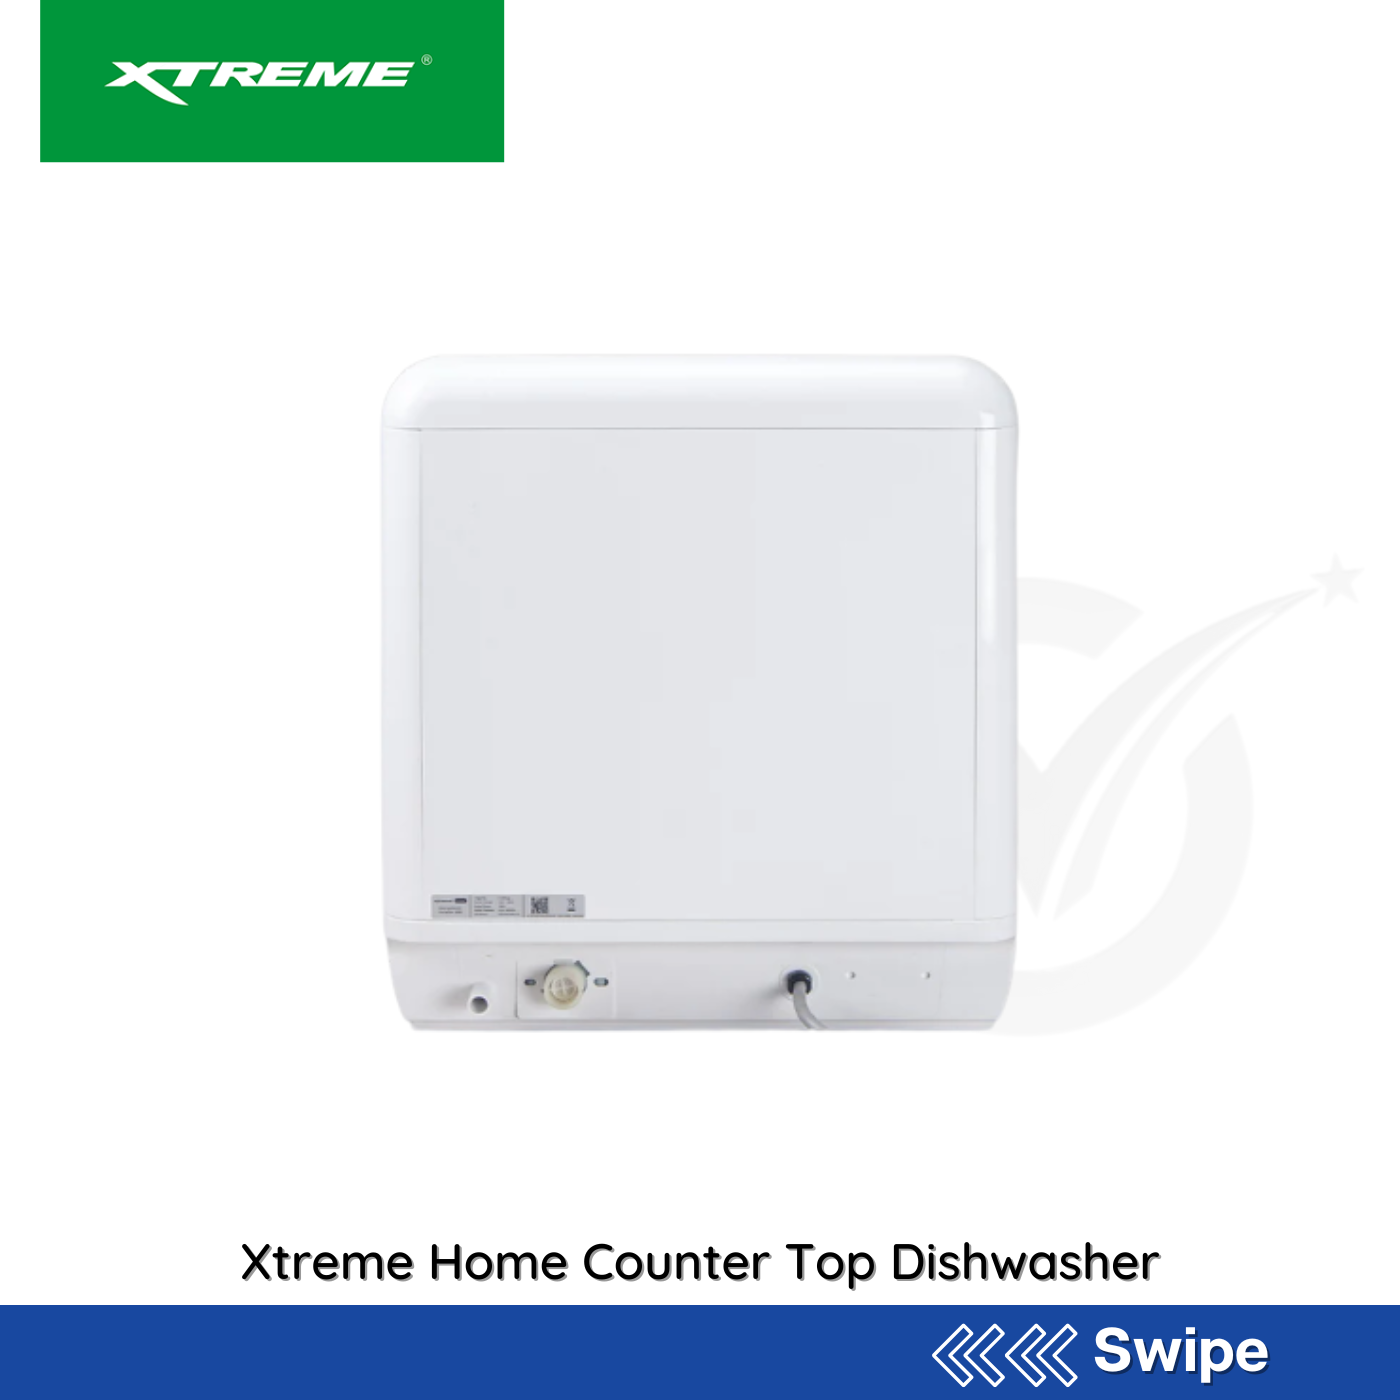 Xtreme Home Counter Top Dishwasher